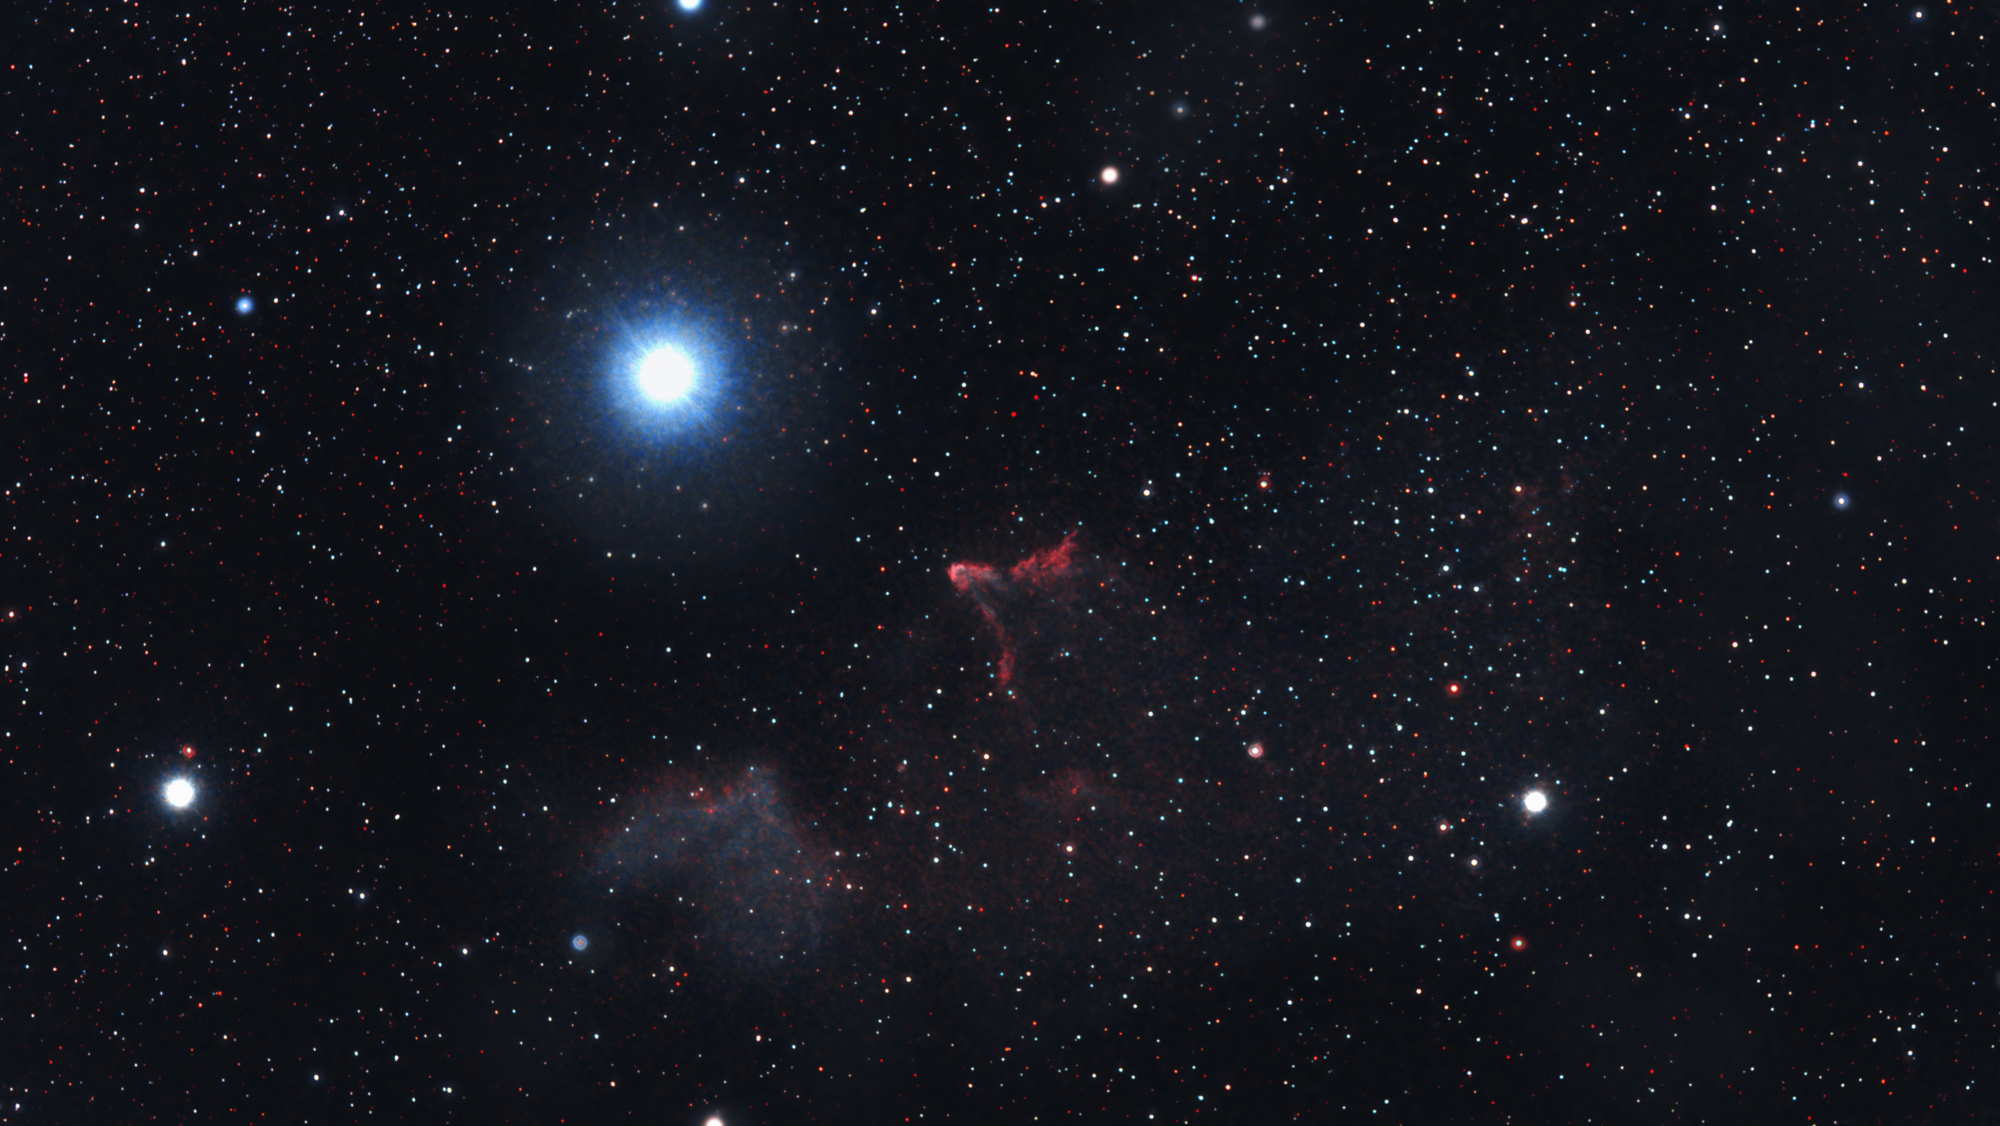 r_pp_IC63 Nebuleuse fantome 67x180s 32bits_stacked_processed-TIF.jpg